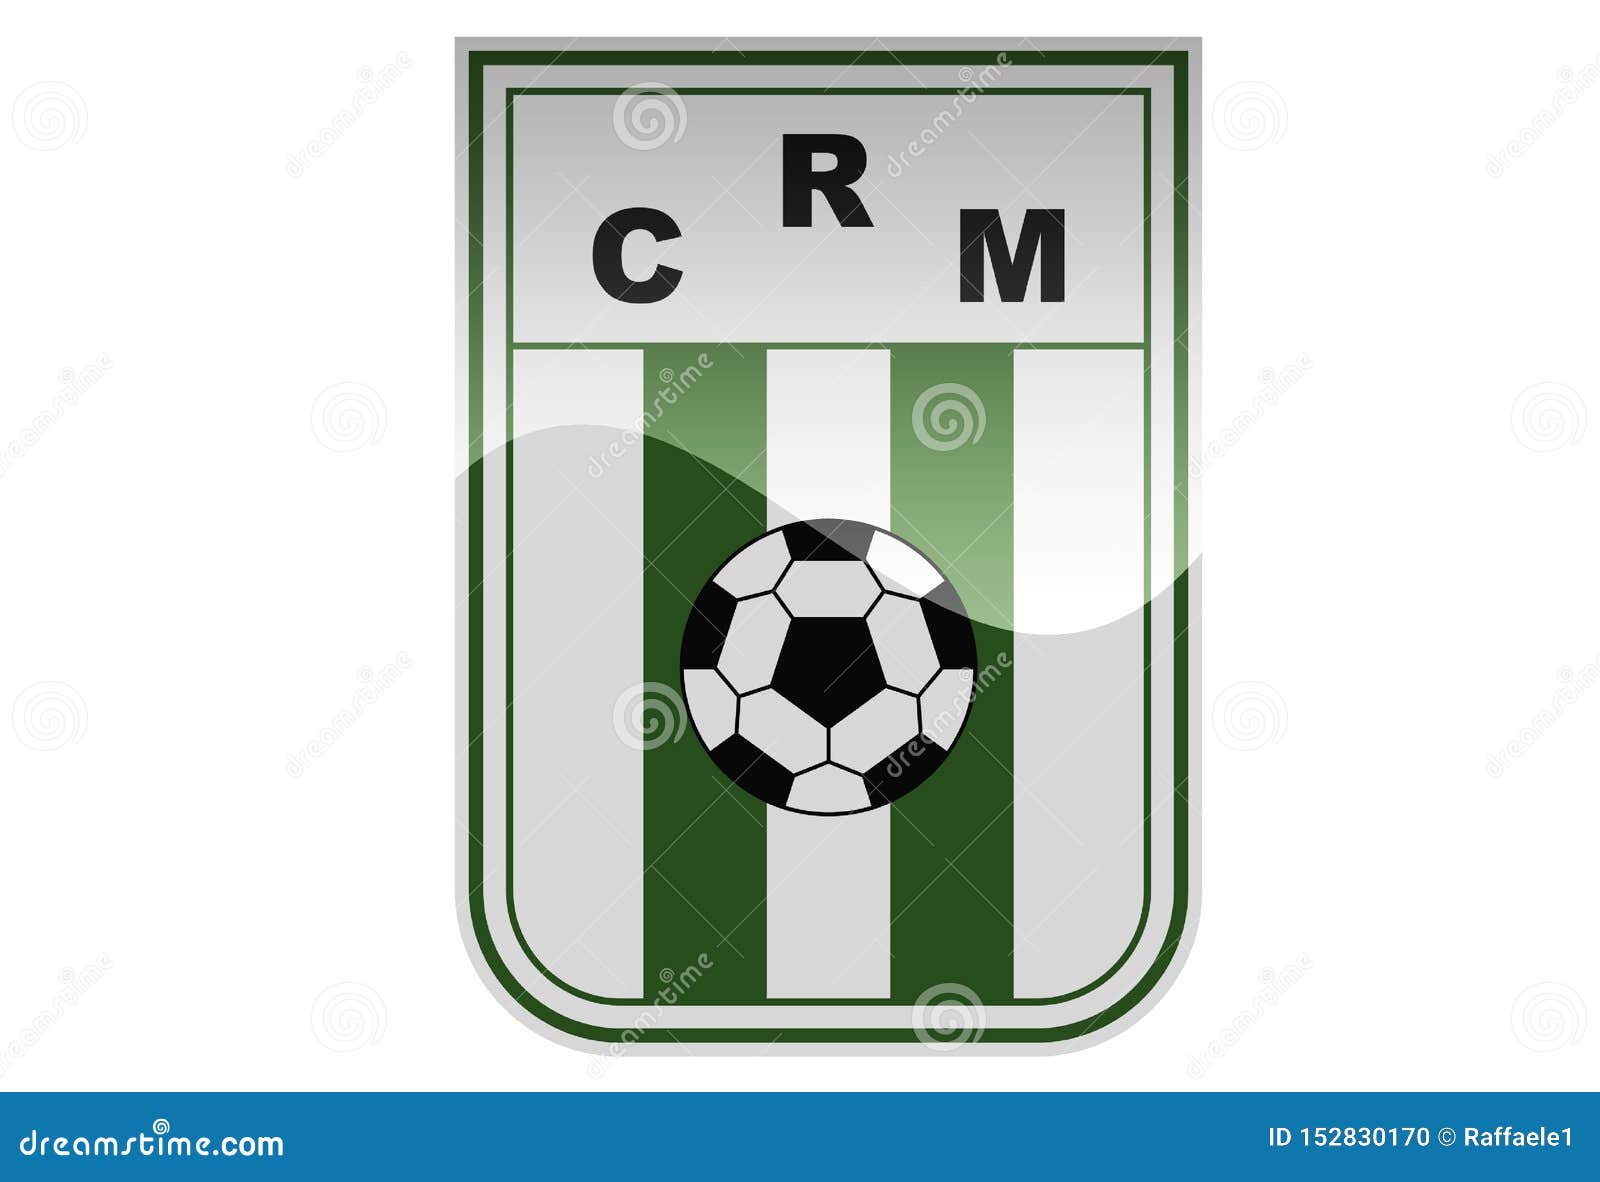 File:Racing Club Montevideo clasifica a fas.JPG - Wikimedia Commons